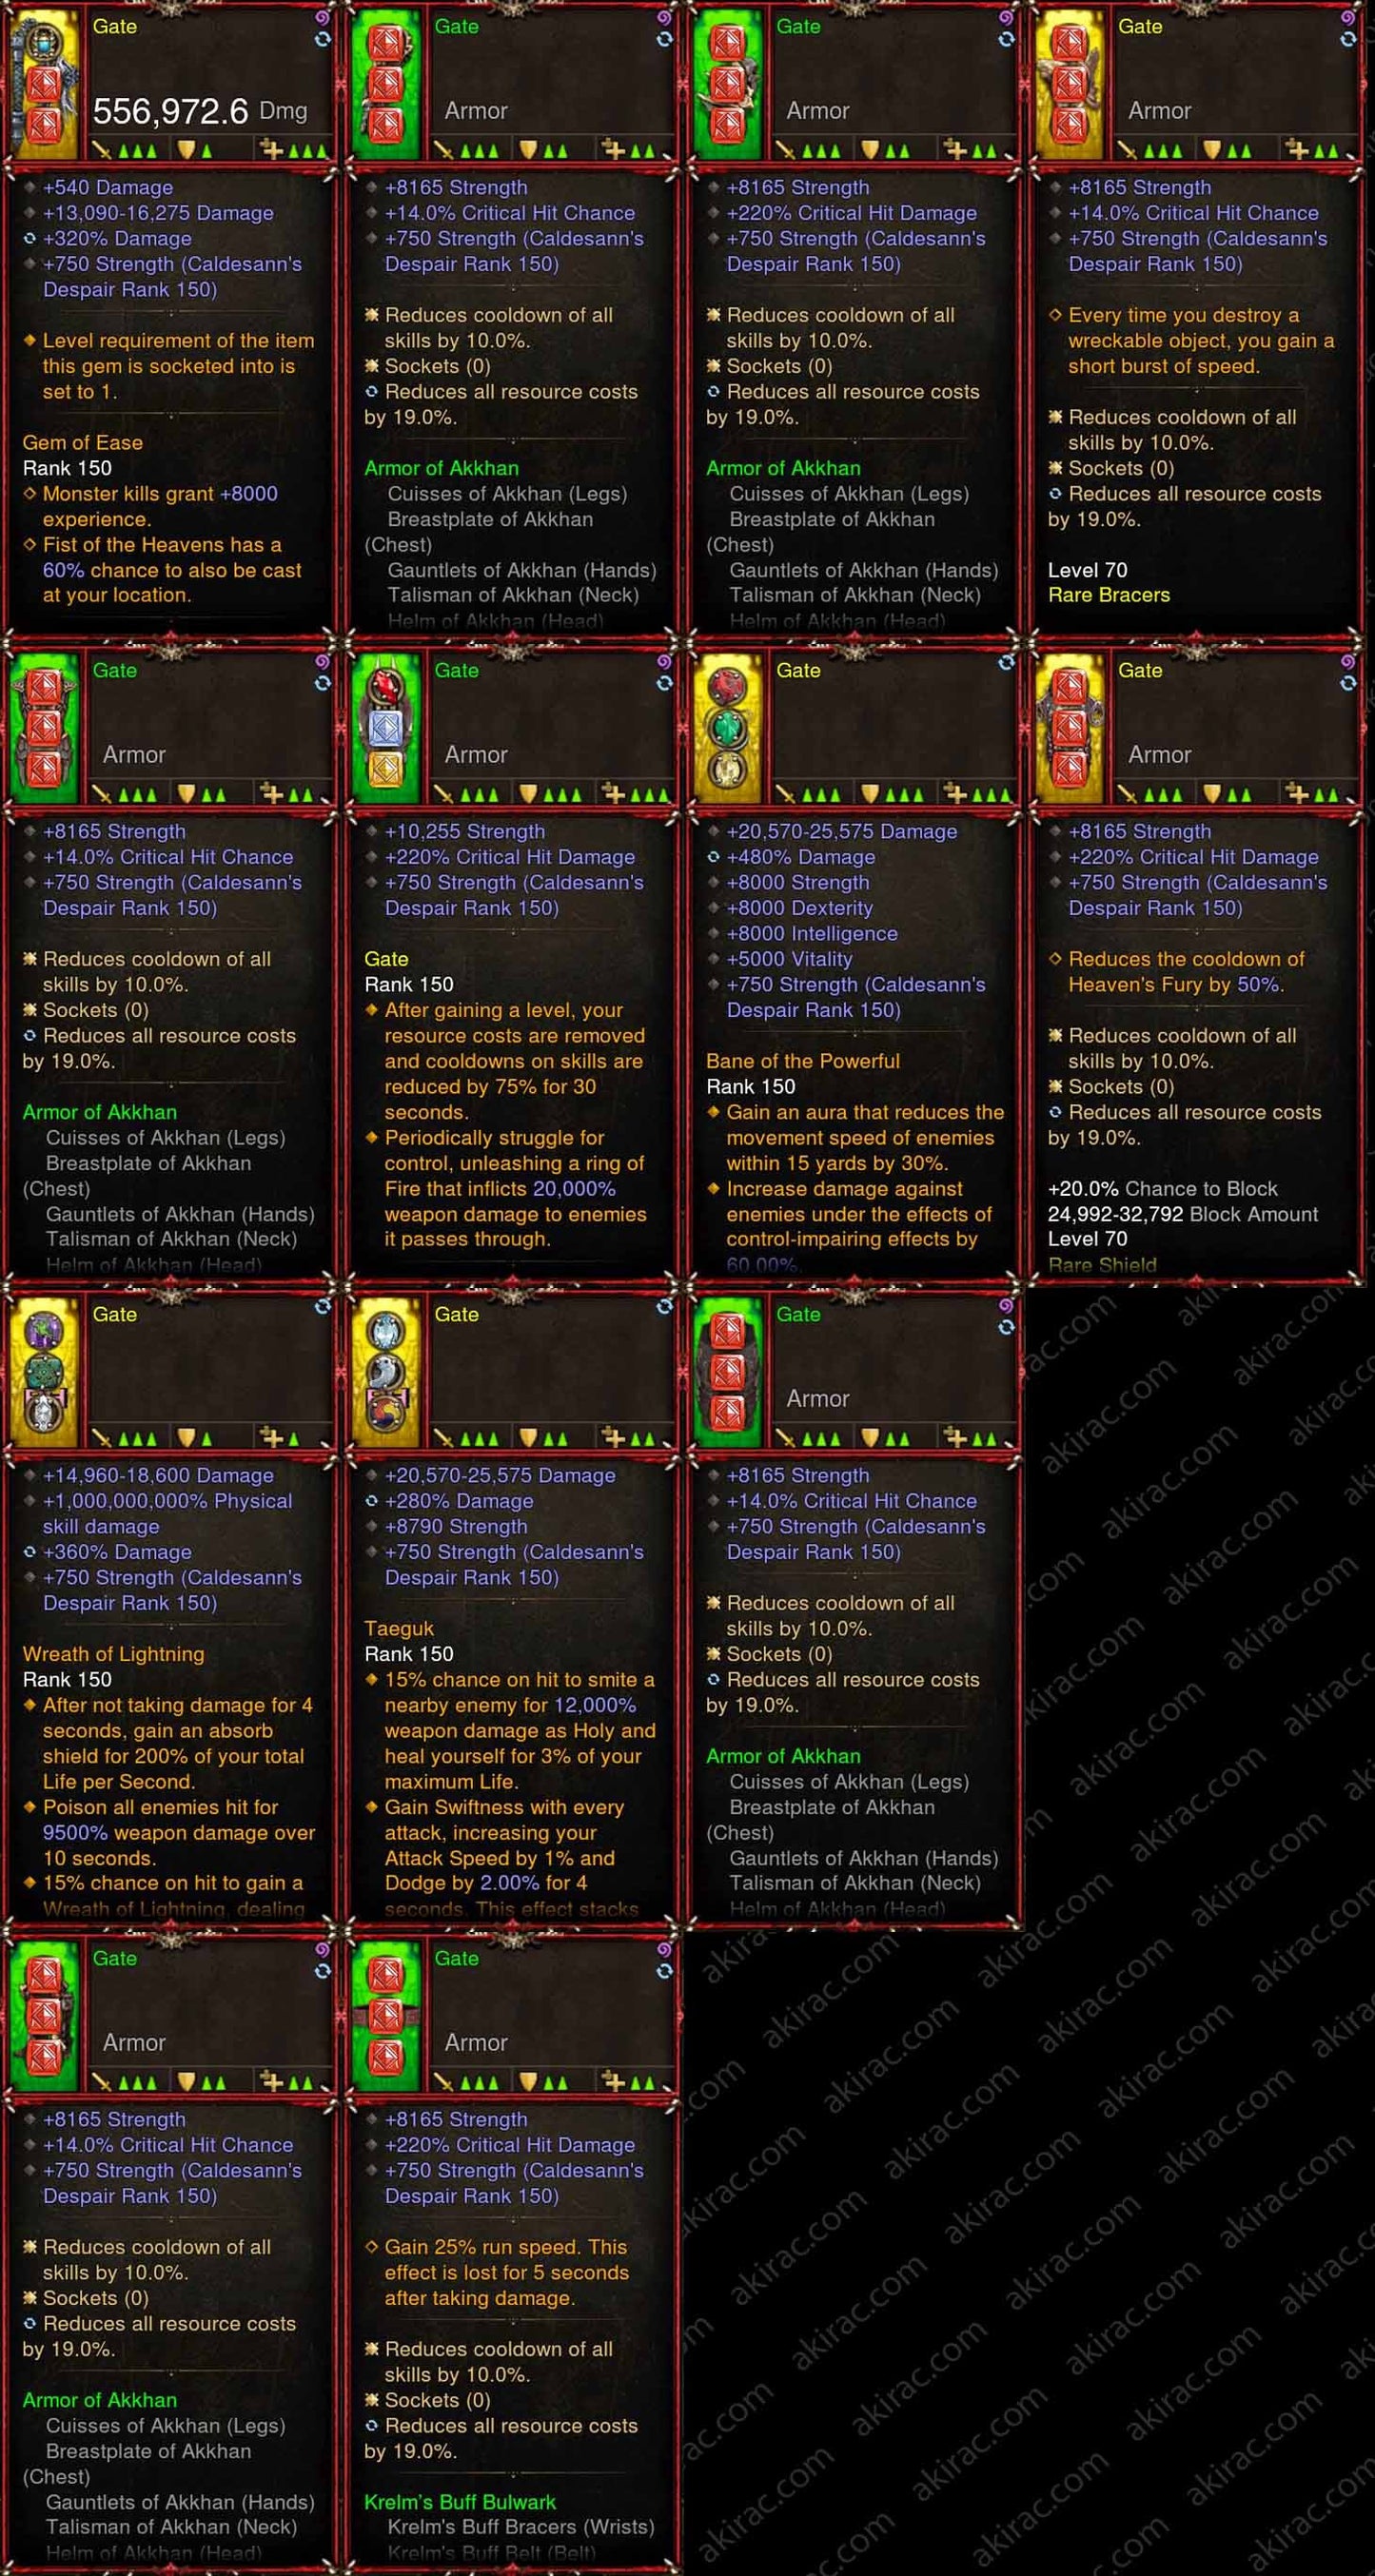 [Primal Ancient] [Quad DPS] Diablo 3 Immortal v5 Akkhans Crusader Rift 150 Gate Diablo 3 Mods ROS Seasonal and Non Seasonal Save Mod - Modded Items and Gear - Hacks - Cheats - Trainers for Playstation 4 - Playstation 5 - Nintendo Switch - Xbox One